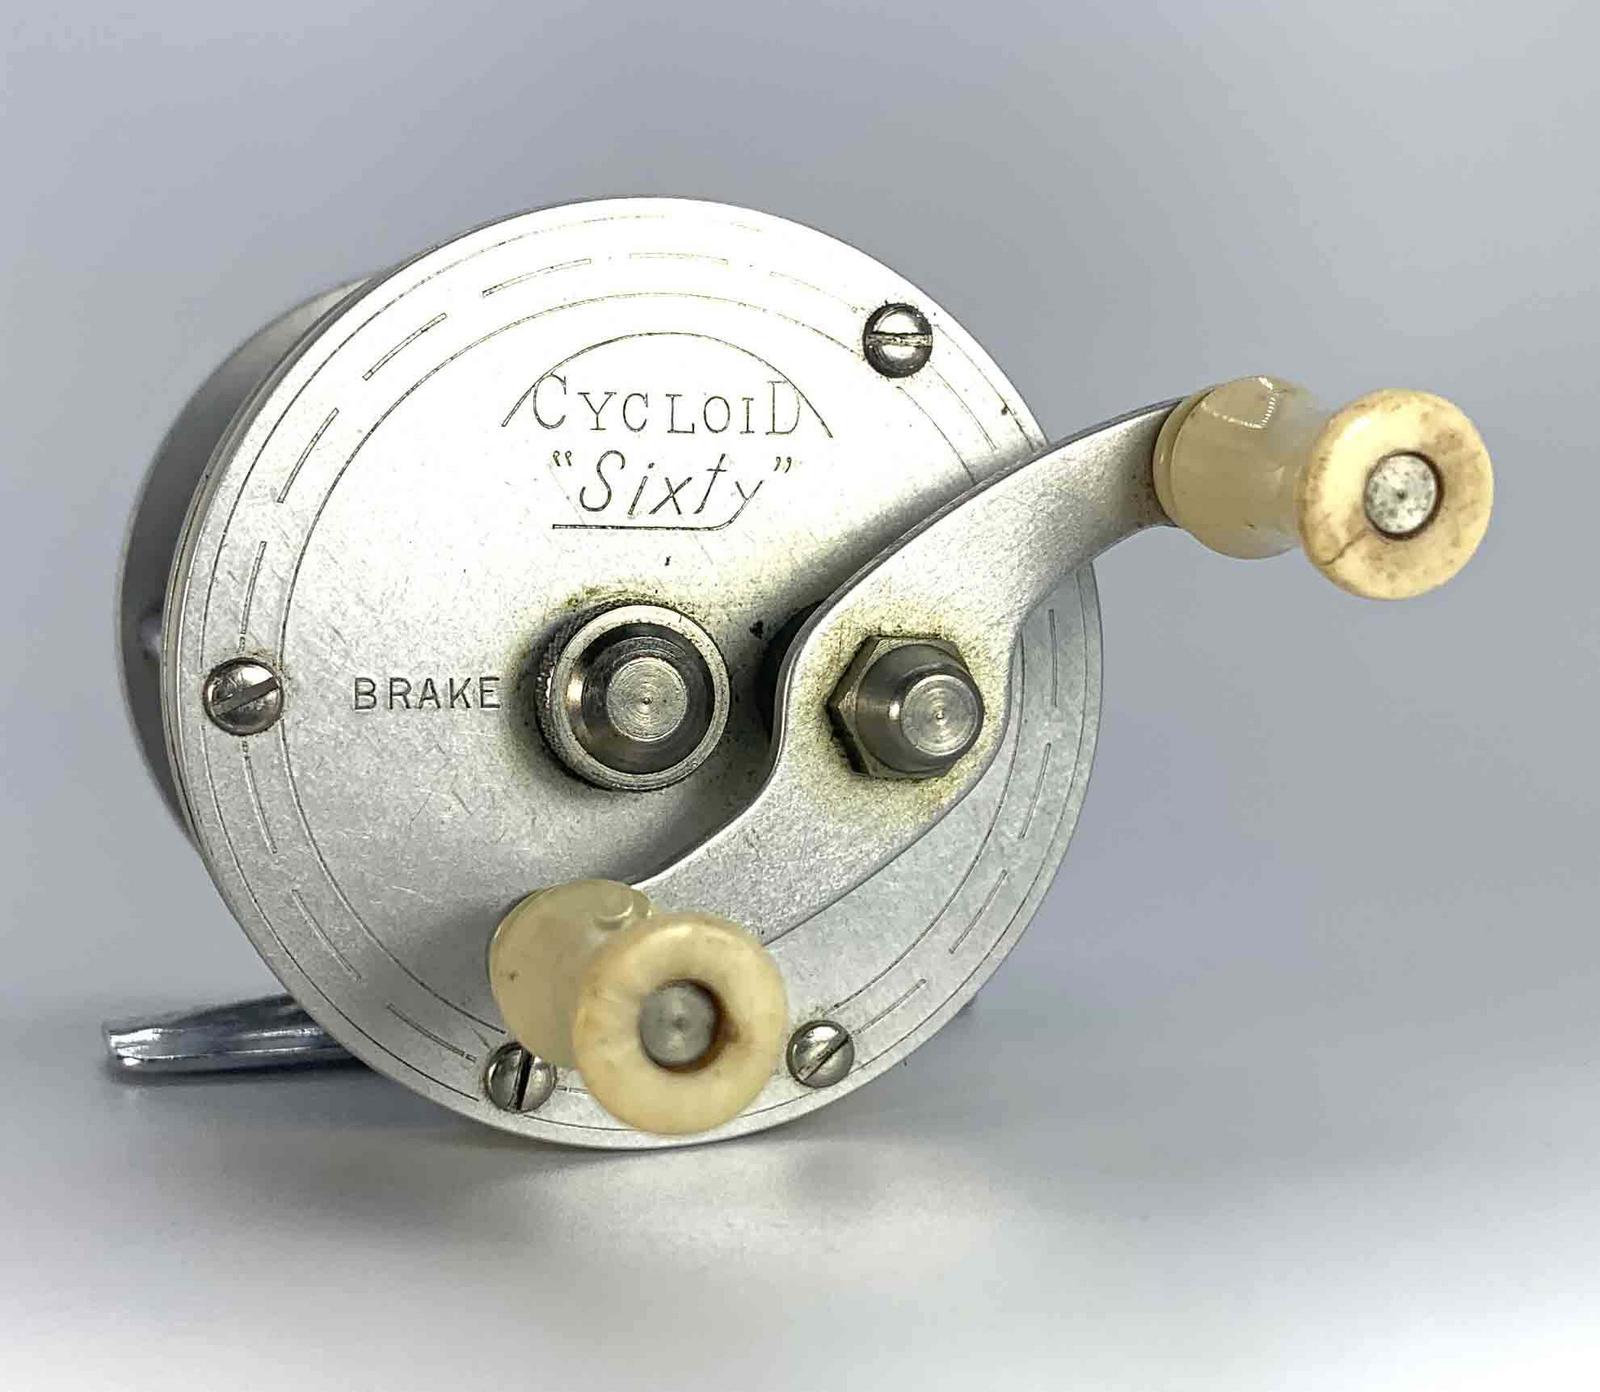 Vintage Cycloid Sixty Bait Casting Reel